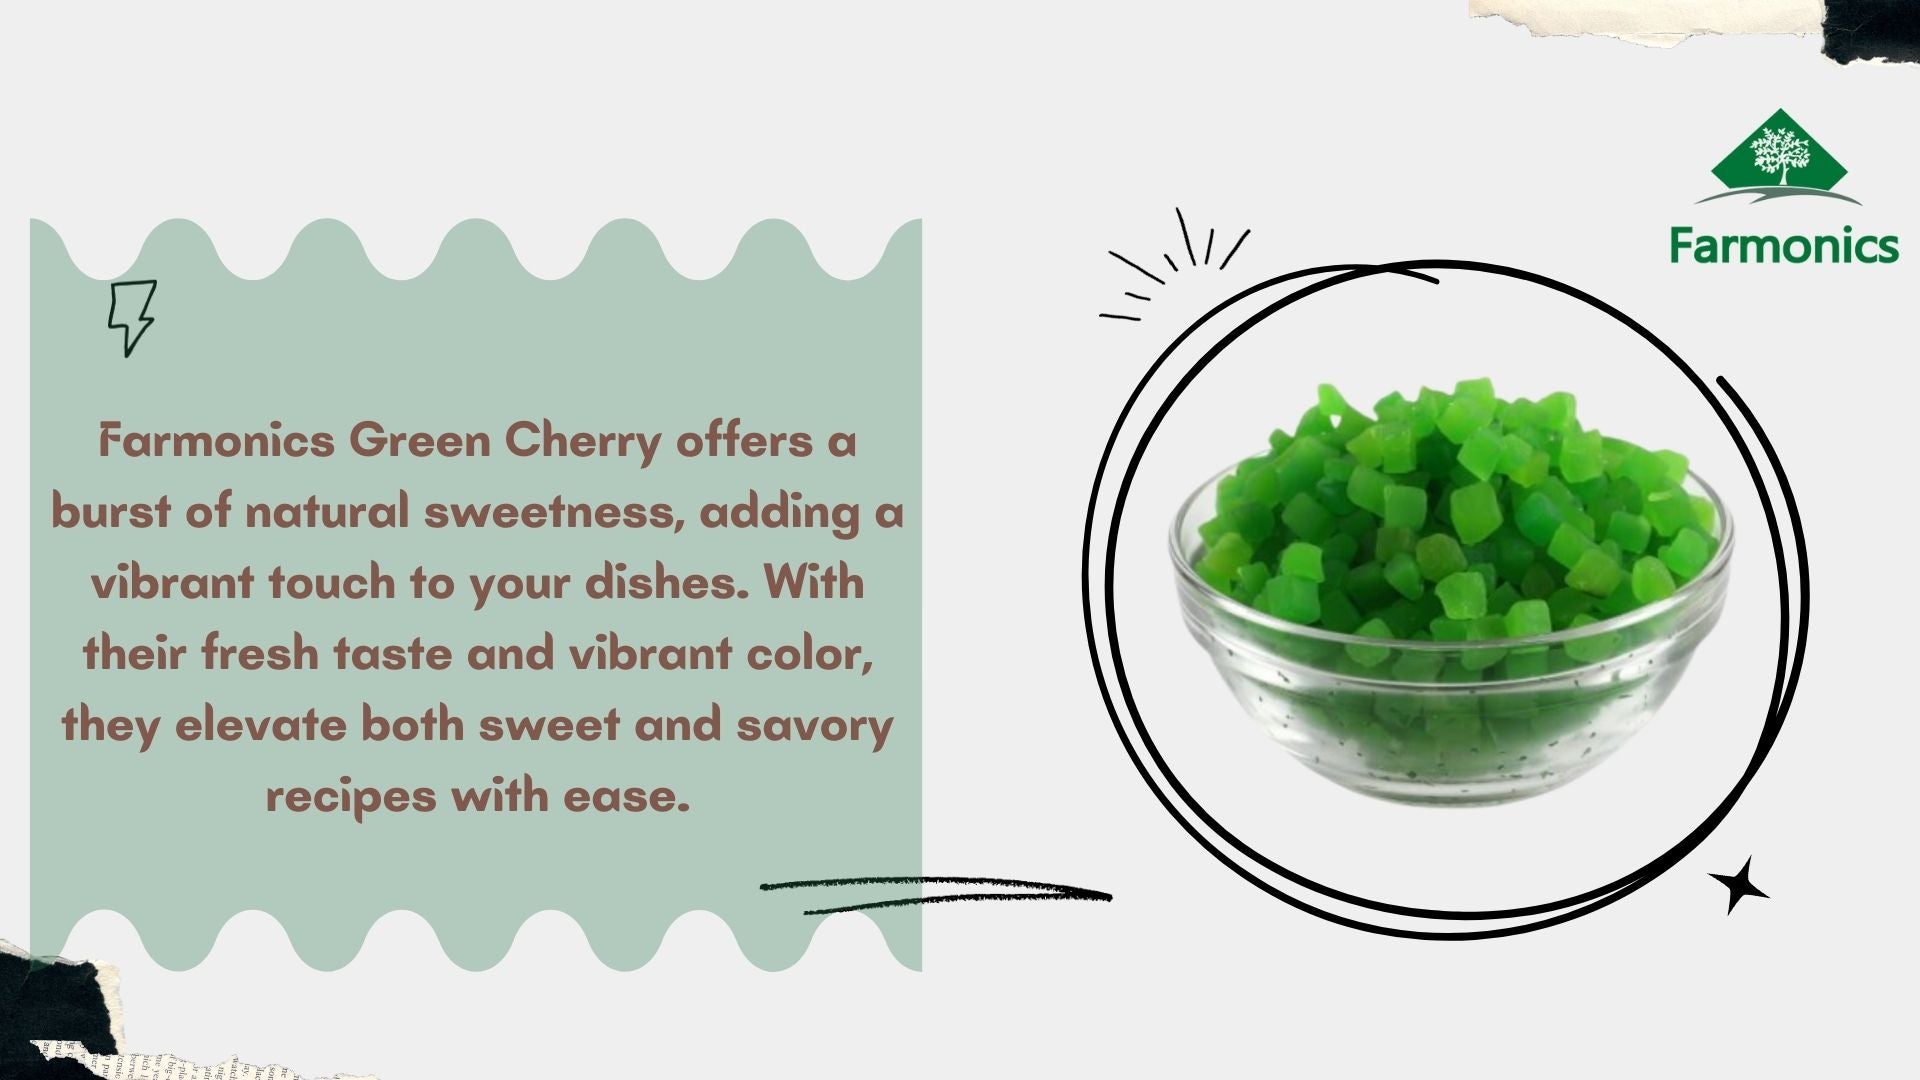 here are some of the information about farmonics green cherry 